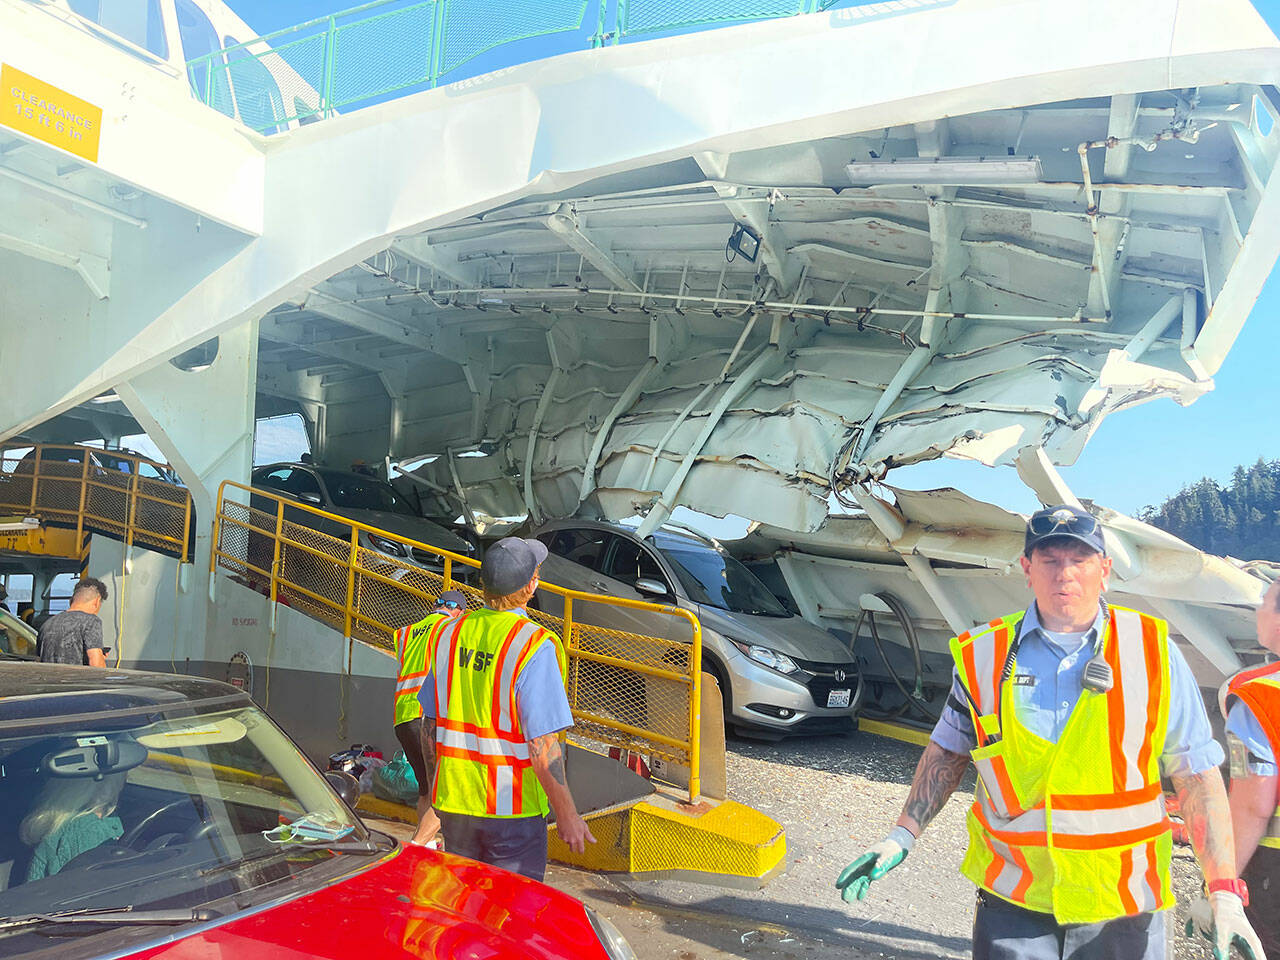 Immediately after the crash, islander Pam Kirkpatrick captured the chaotic scene, showing metal folded over the tops of cars on the left side of the boat. (Pam Kirkpatrick Photo)